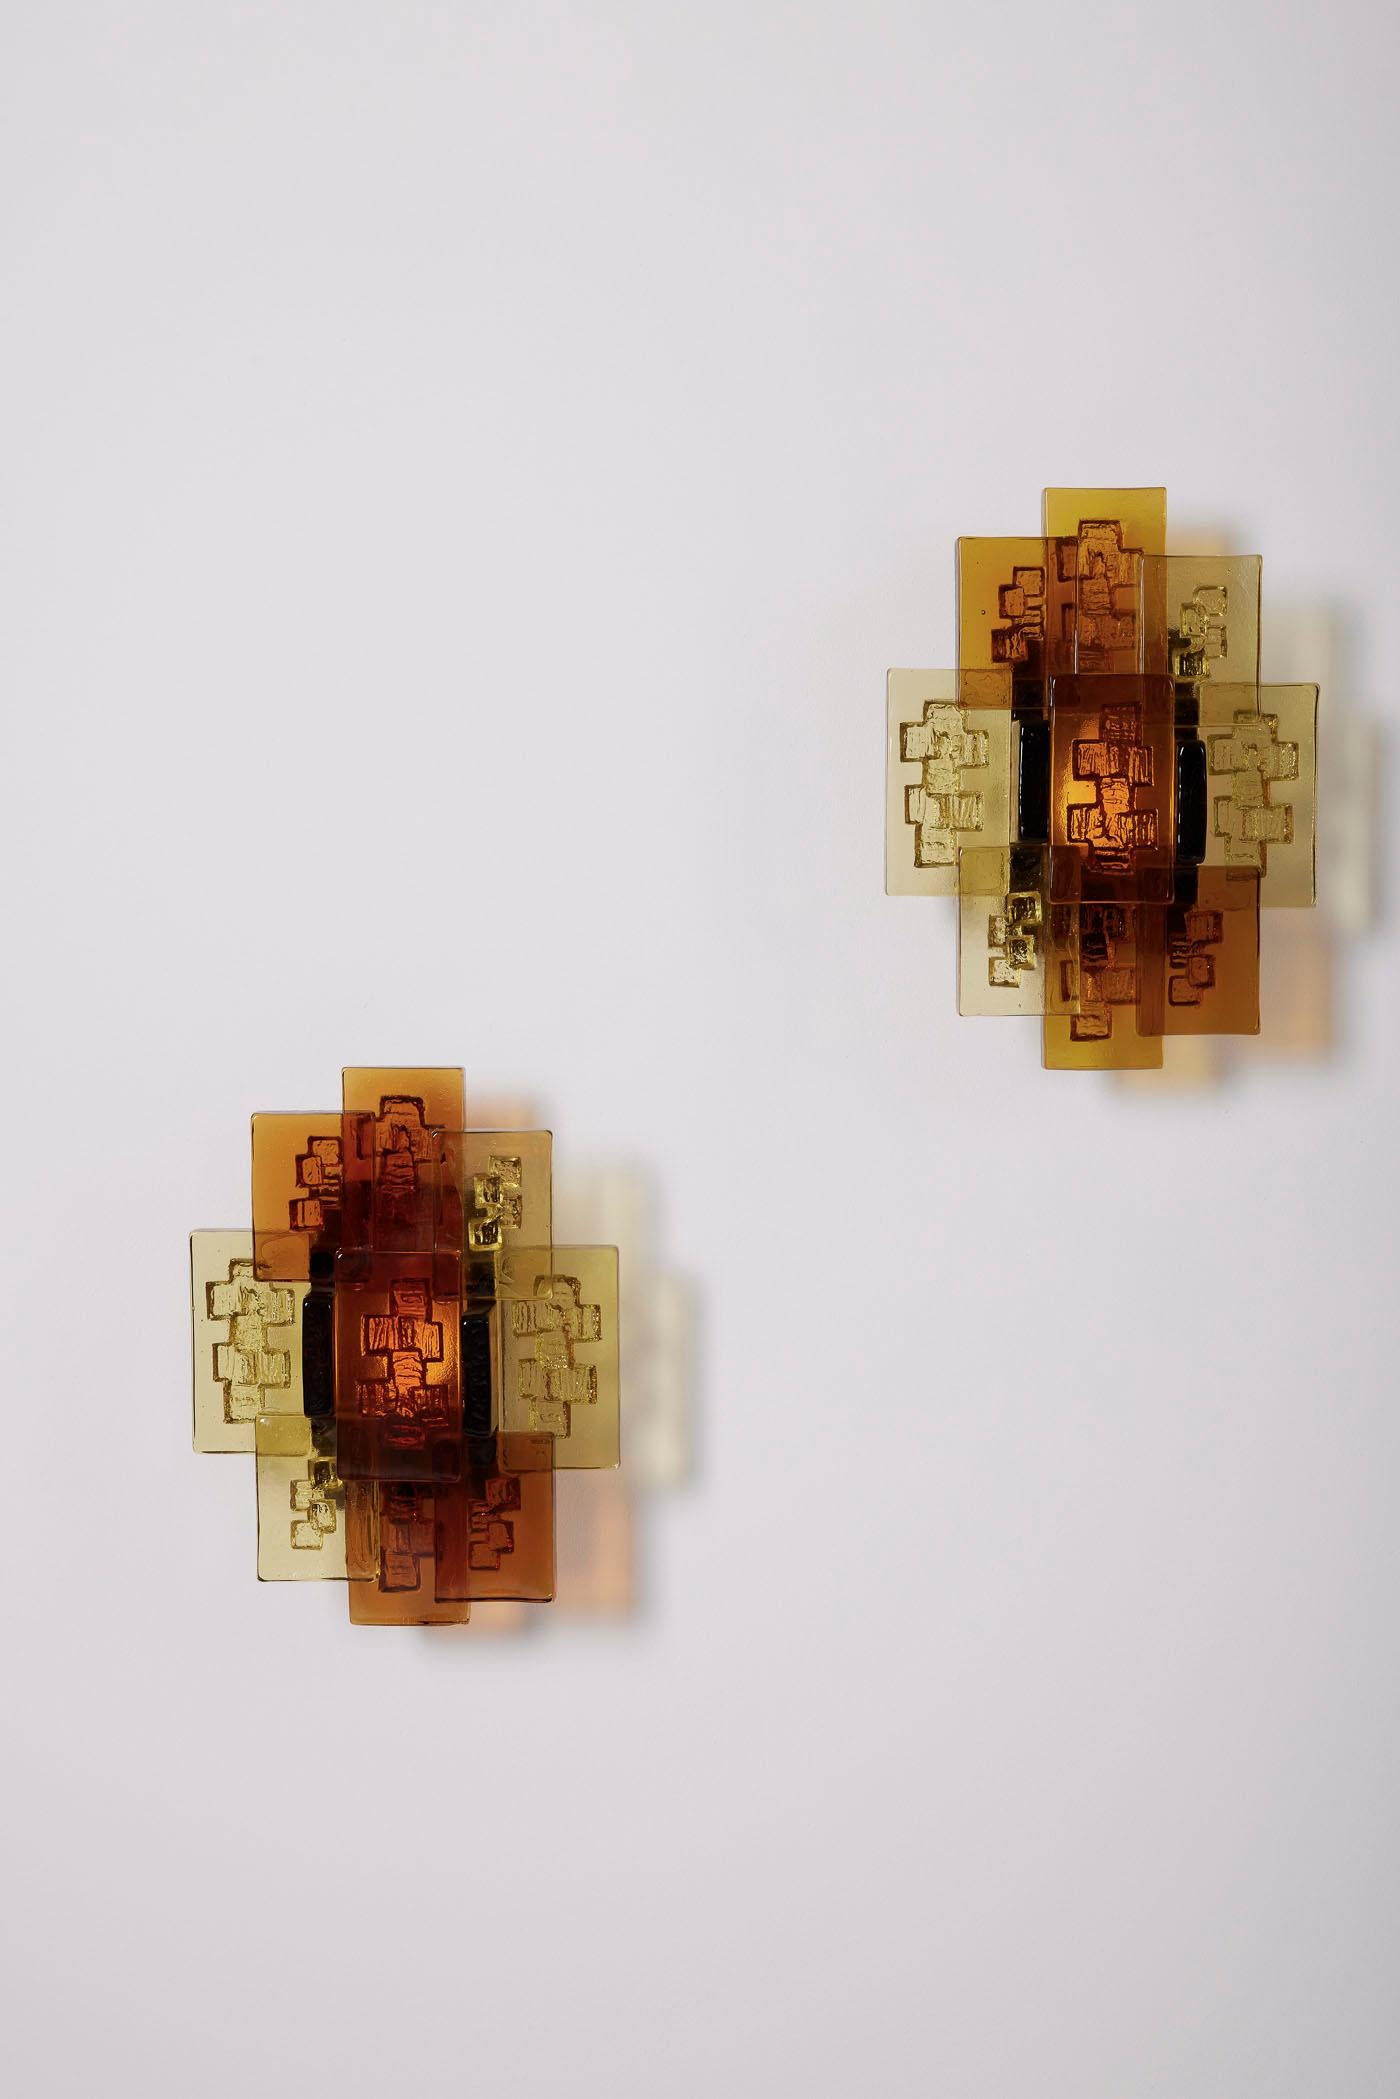 Pair of glass wall lights by Danish designer Svend Aage Holm Sørensen (1913-2004), dating back to the 1950s. The diffuser features a set of thick amber and yellow glass rectangles. In very good overall condition.

LP1965